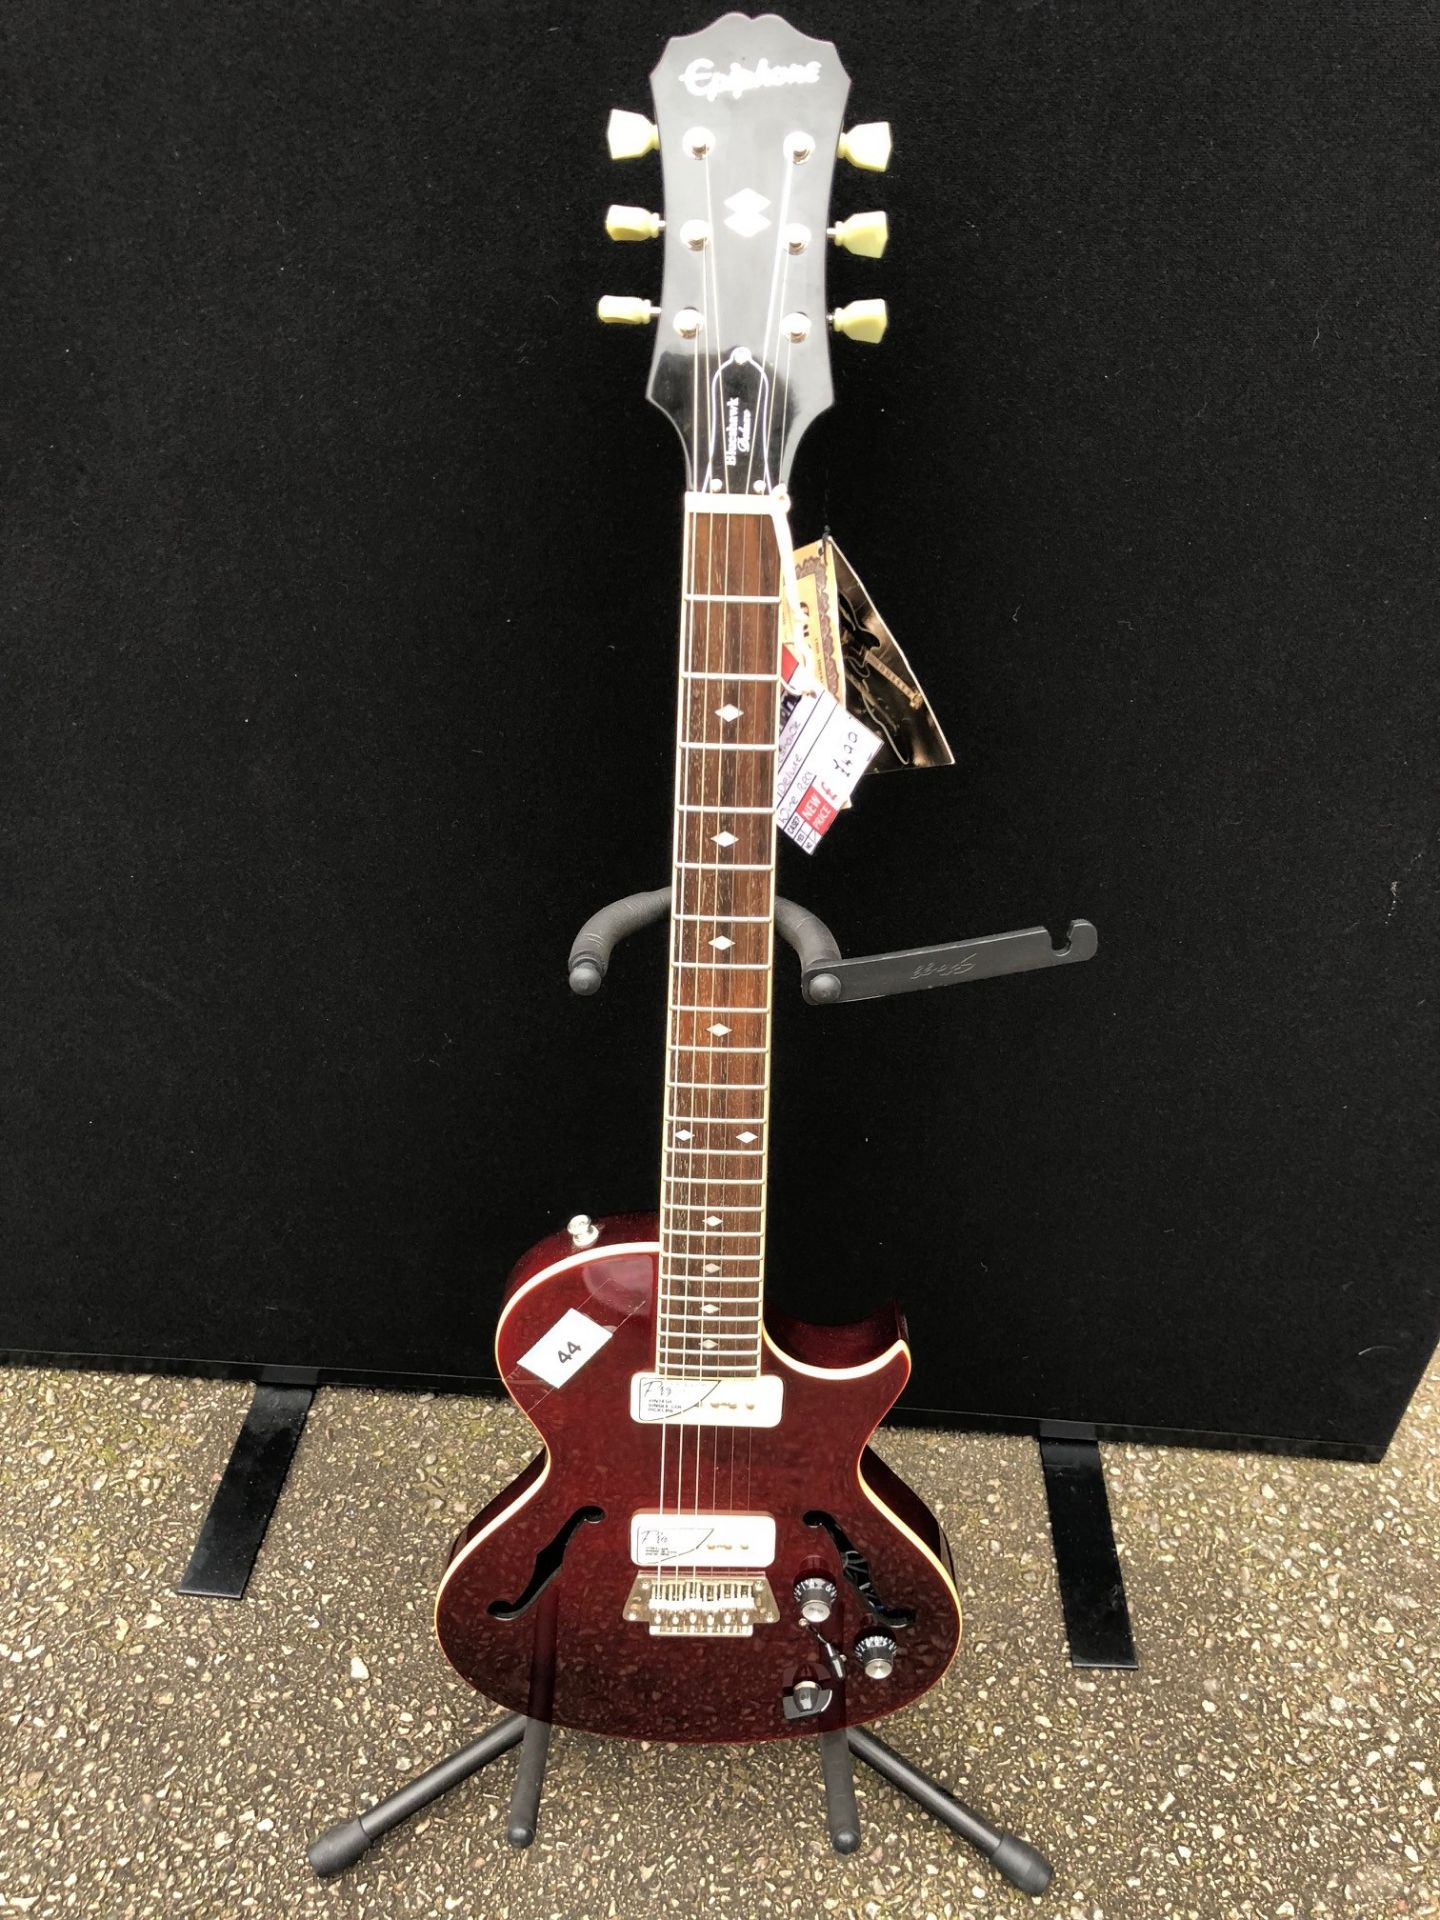 Epiphone Blueshawk Deluxe Wine Red Electric Guitar (Brand New Ex Display - RRP £499.00)